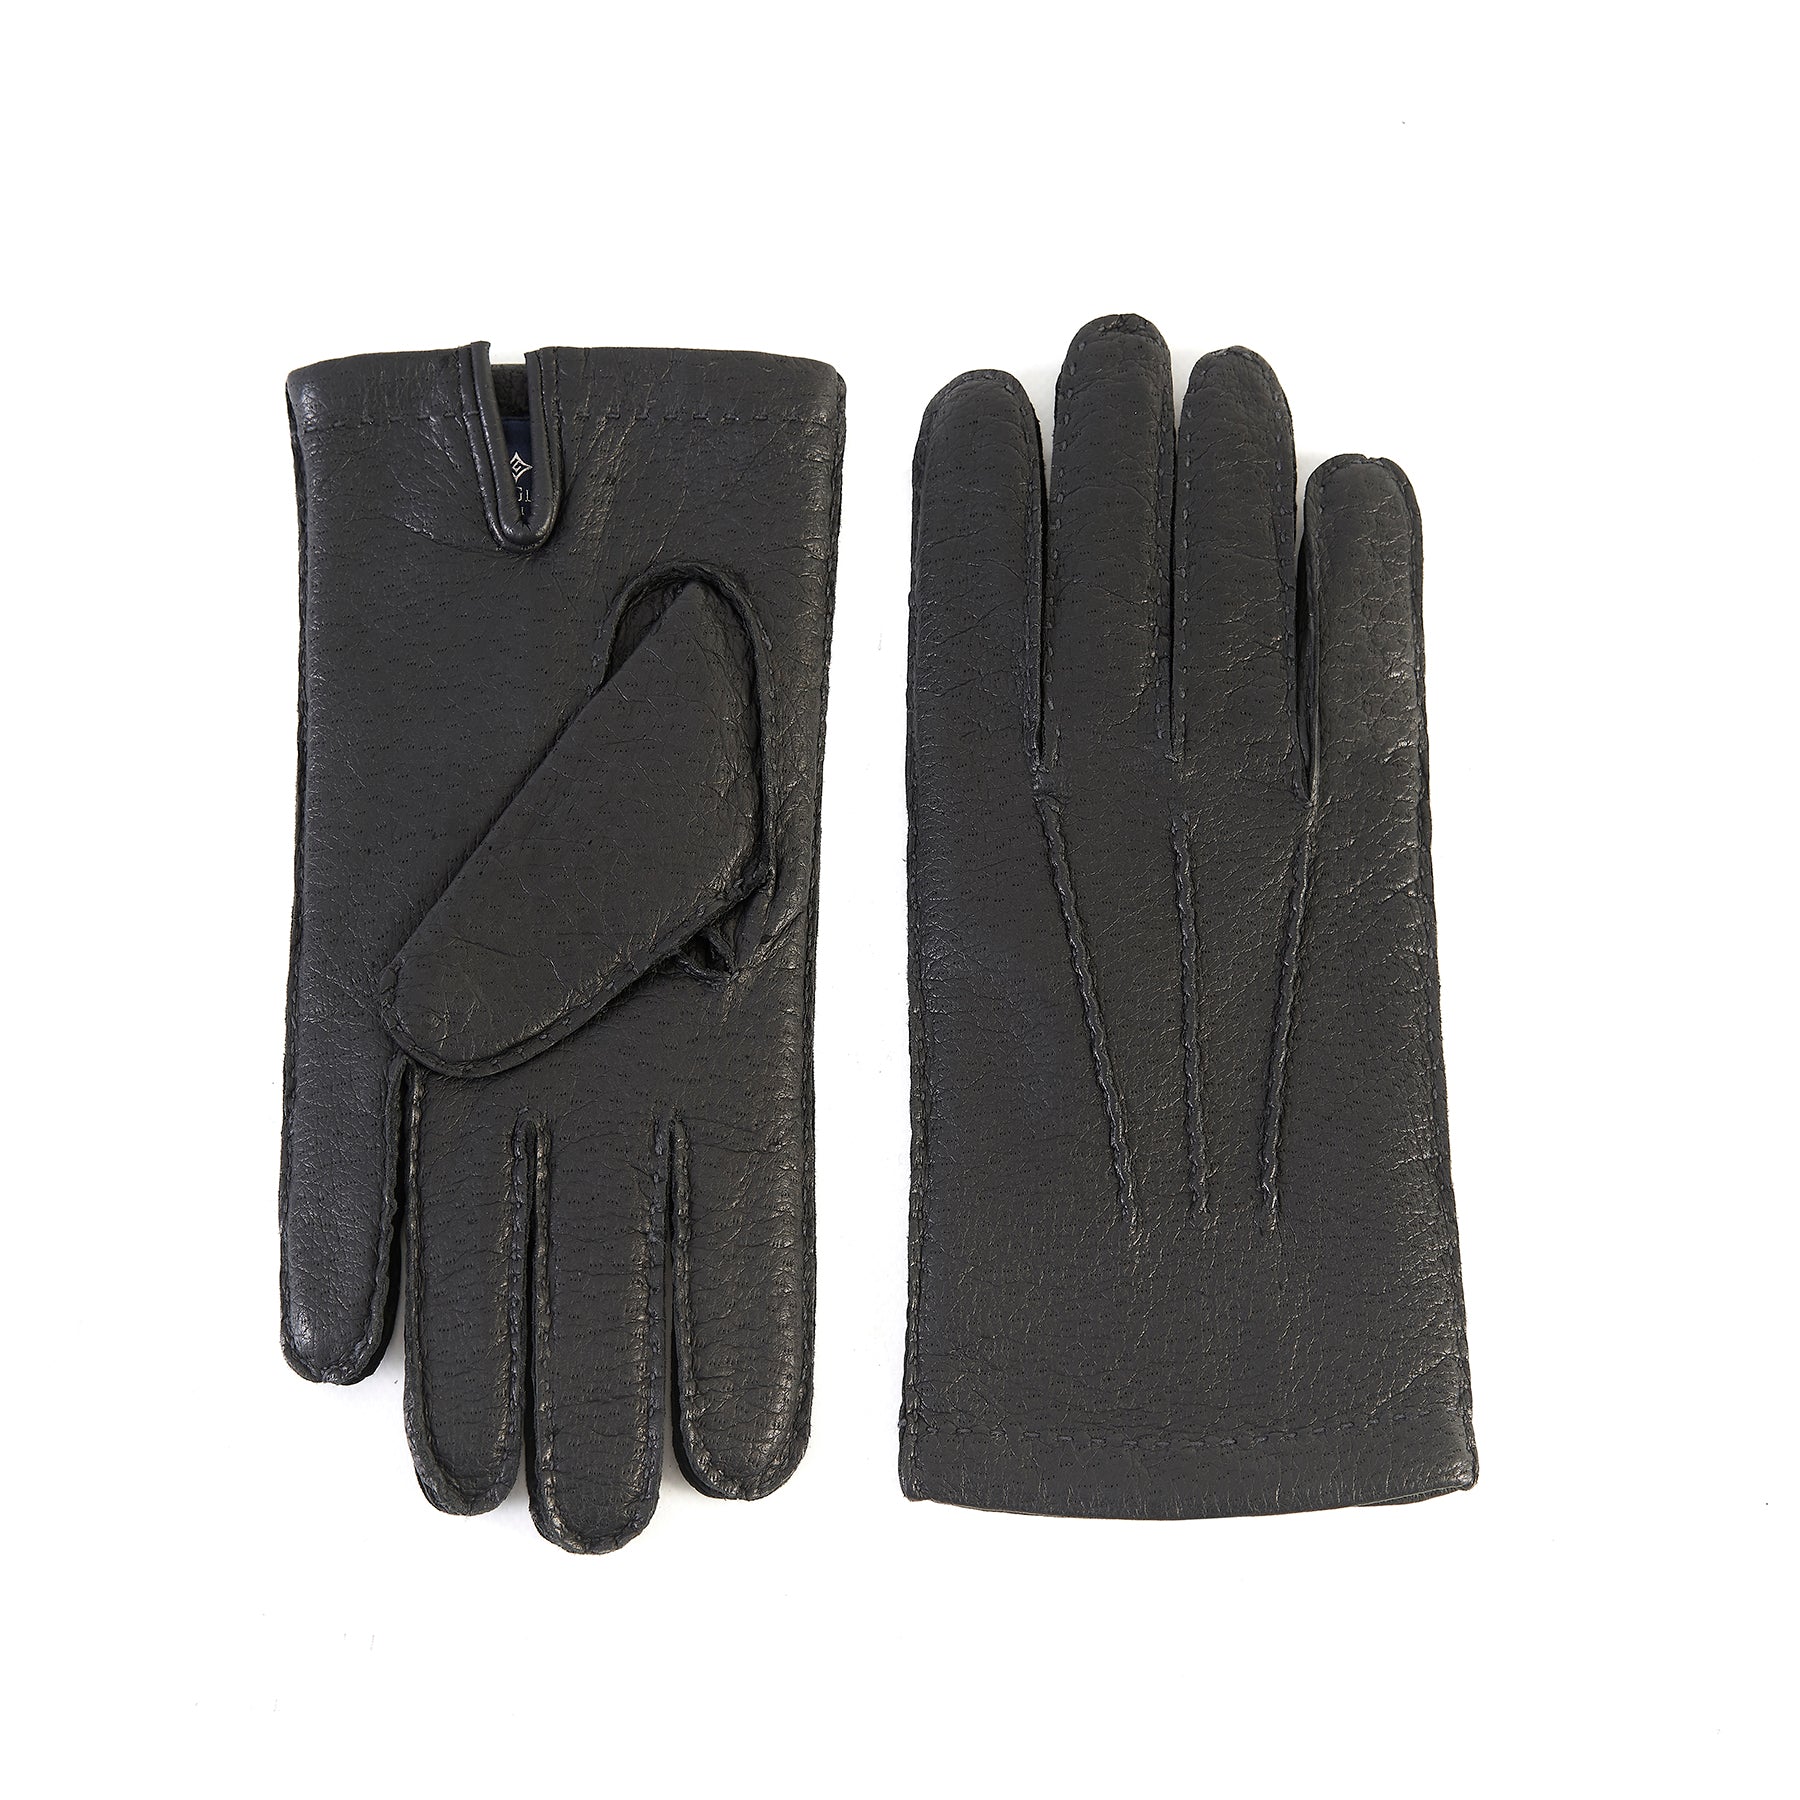 Men's black peccary leather gloves cashmere lined